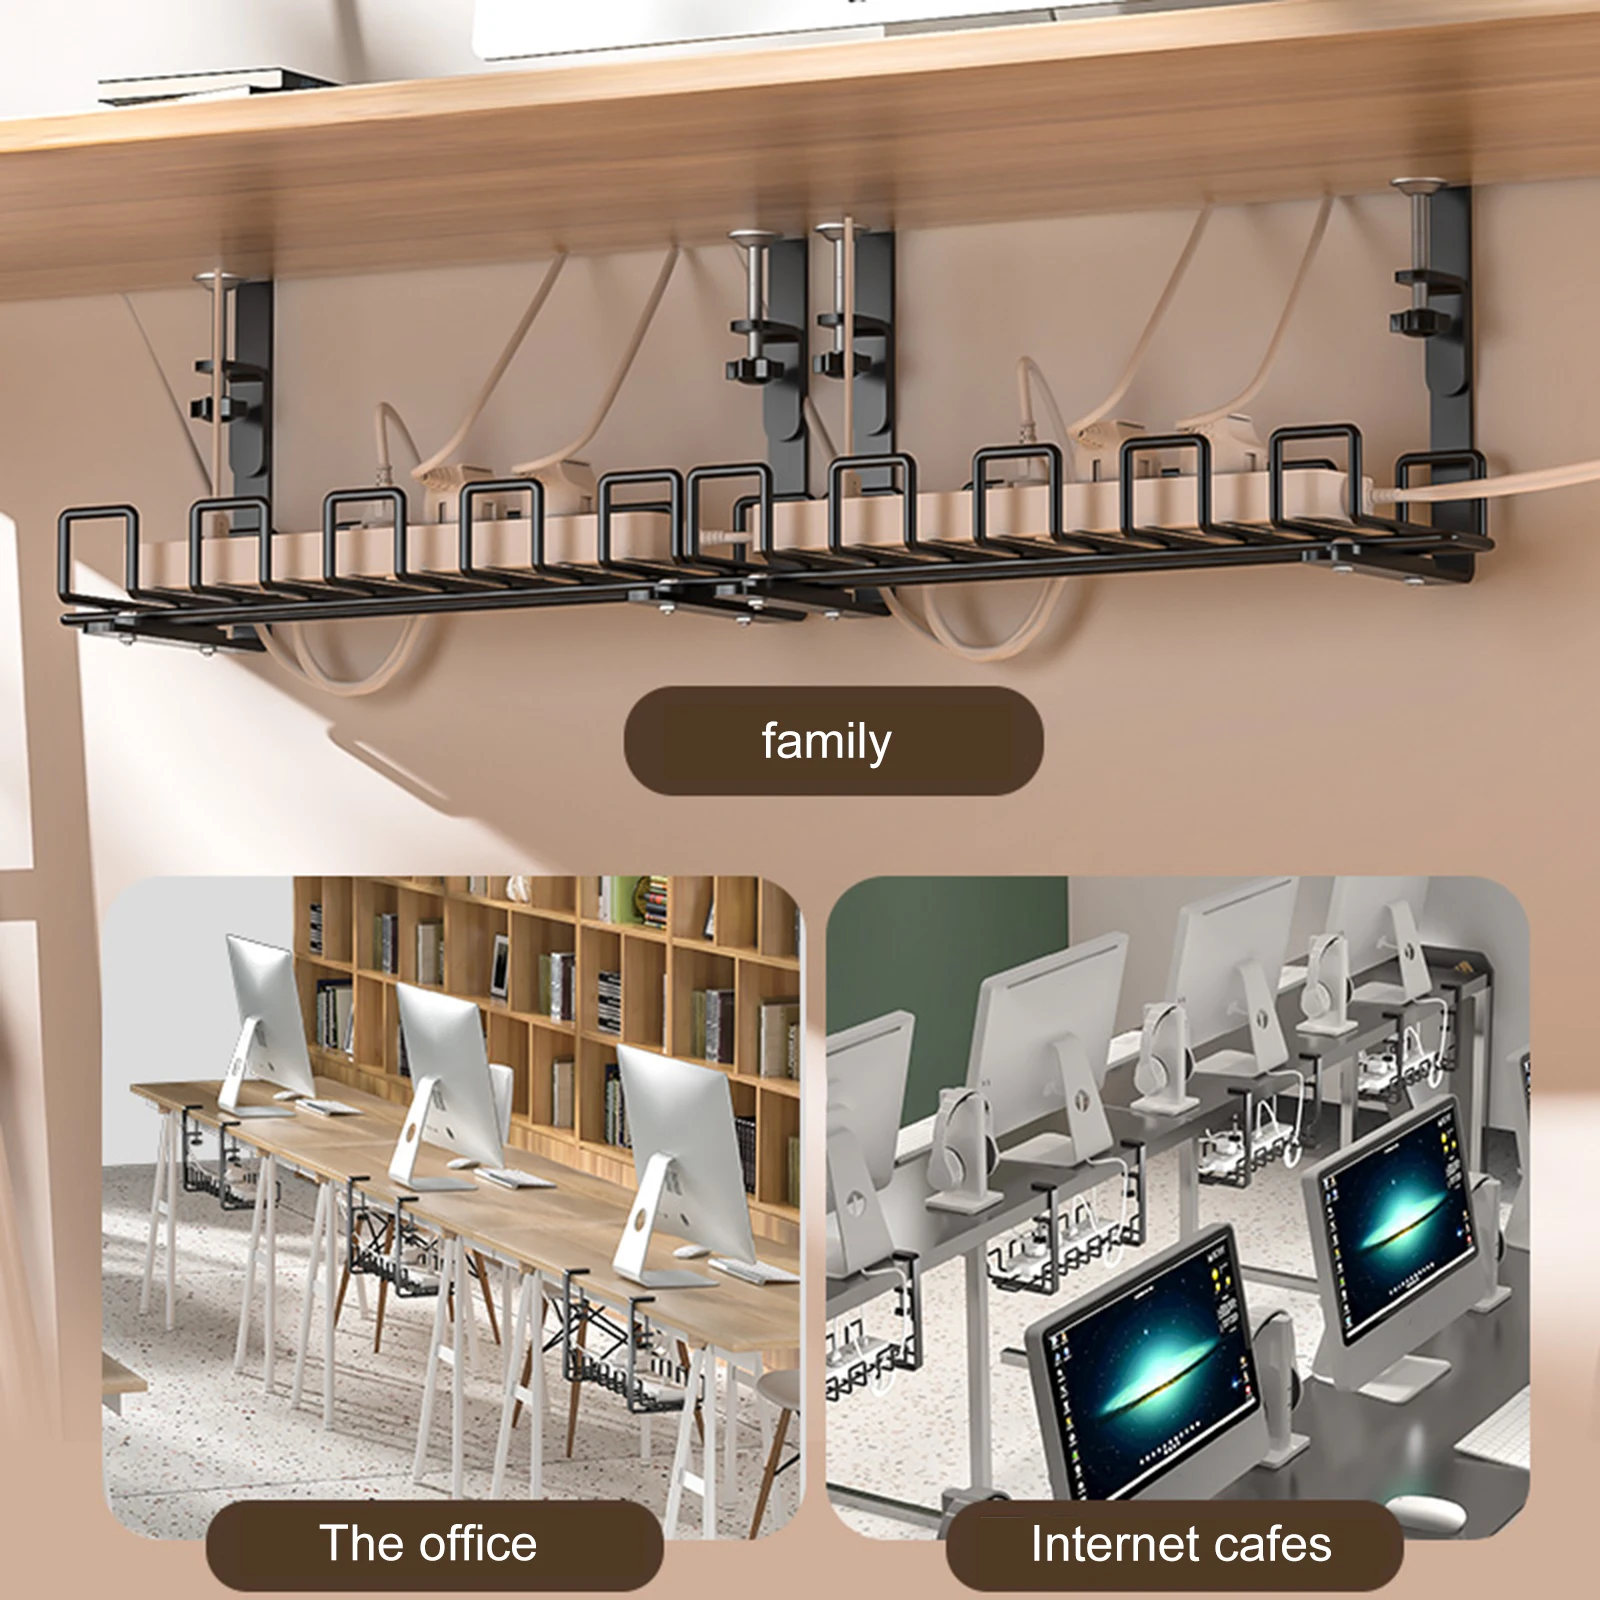 https://ae01.alicdn.com/kf/S8e47b02d55124a019effe384501189eaM/Under-Desk-Cable-Tray-Wire-Management-Under-Table-Socket-Hang-Holder-Power-Strip-Storage-Rack-Wire.jpg